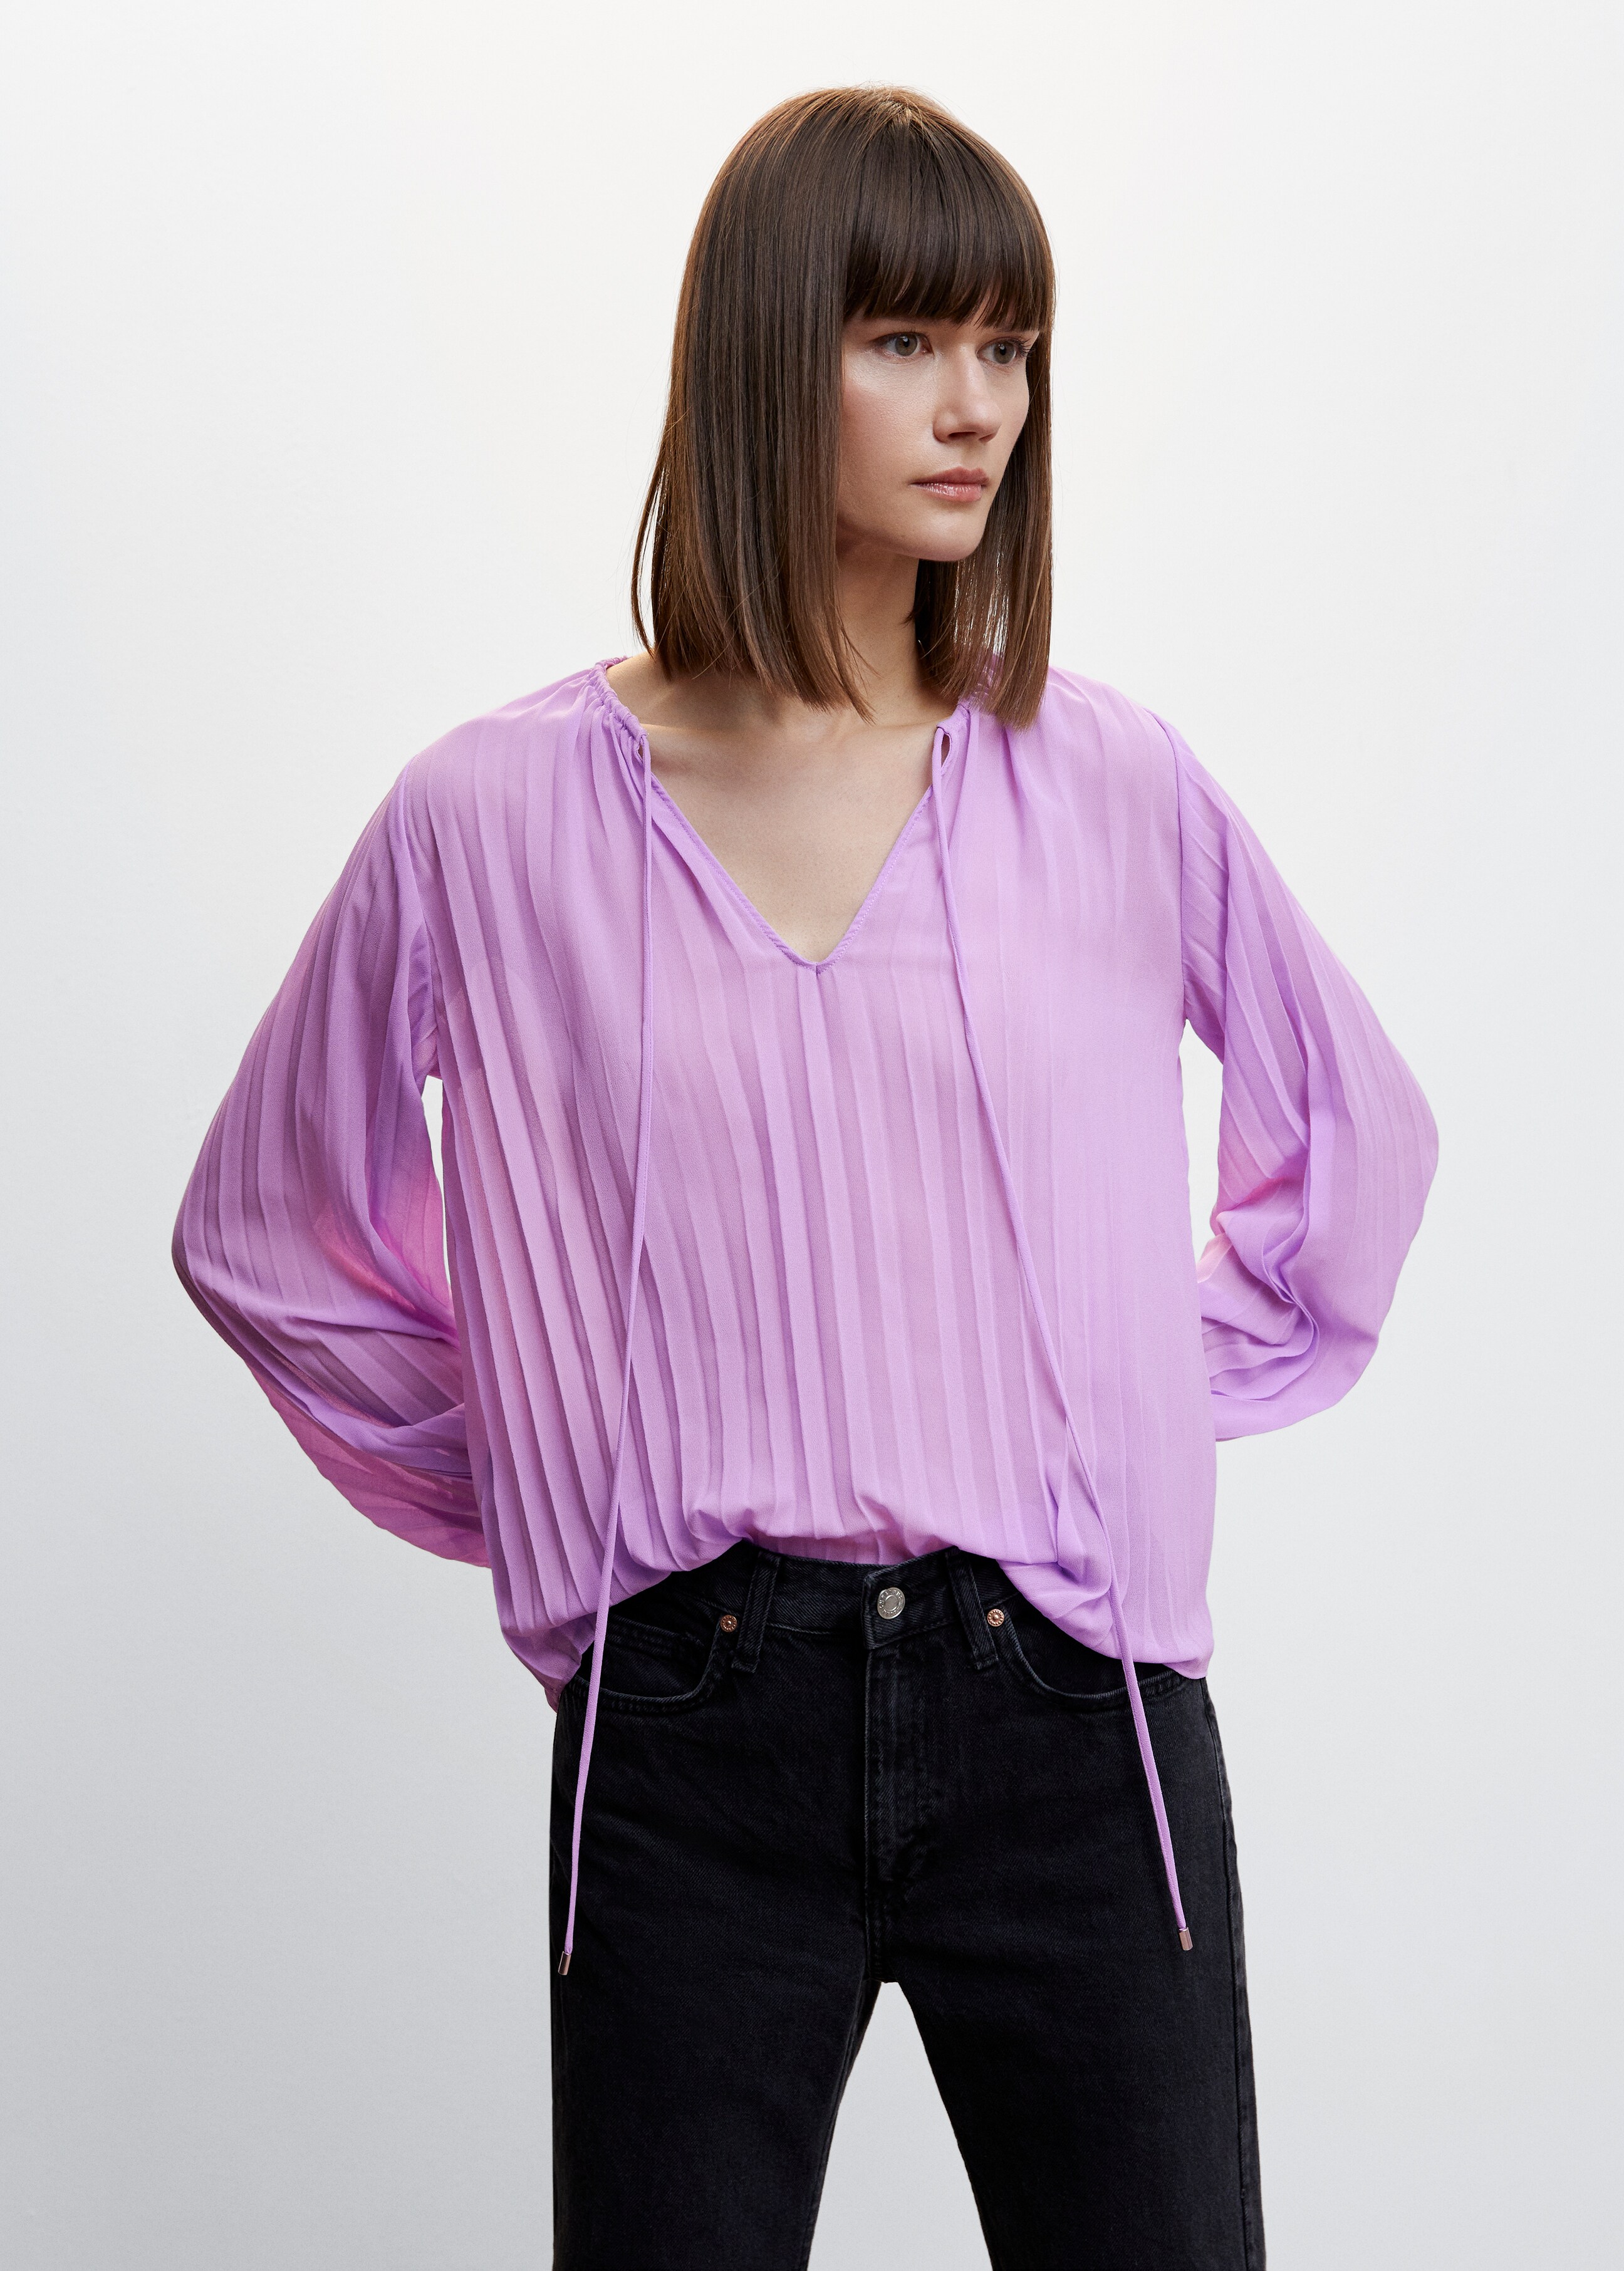 Pleated blouse with puffed sleeves - Medium plane